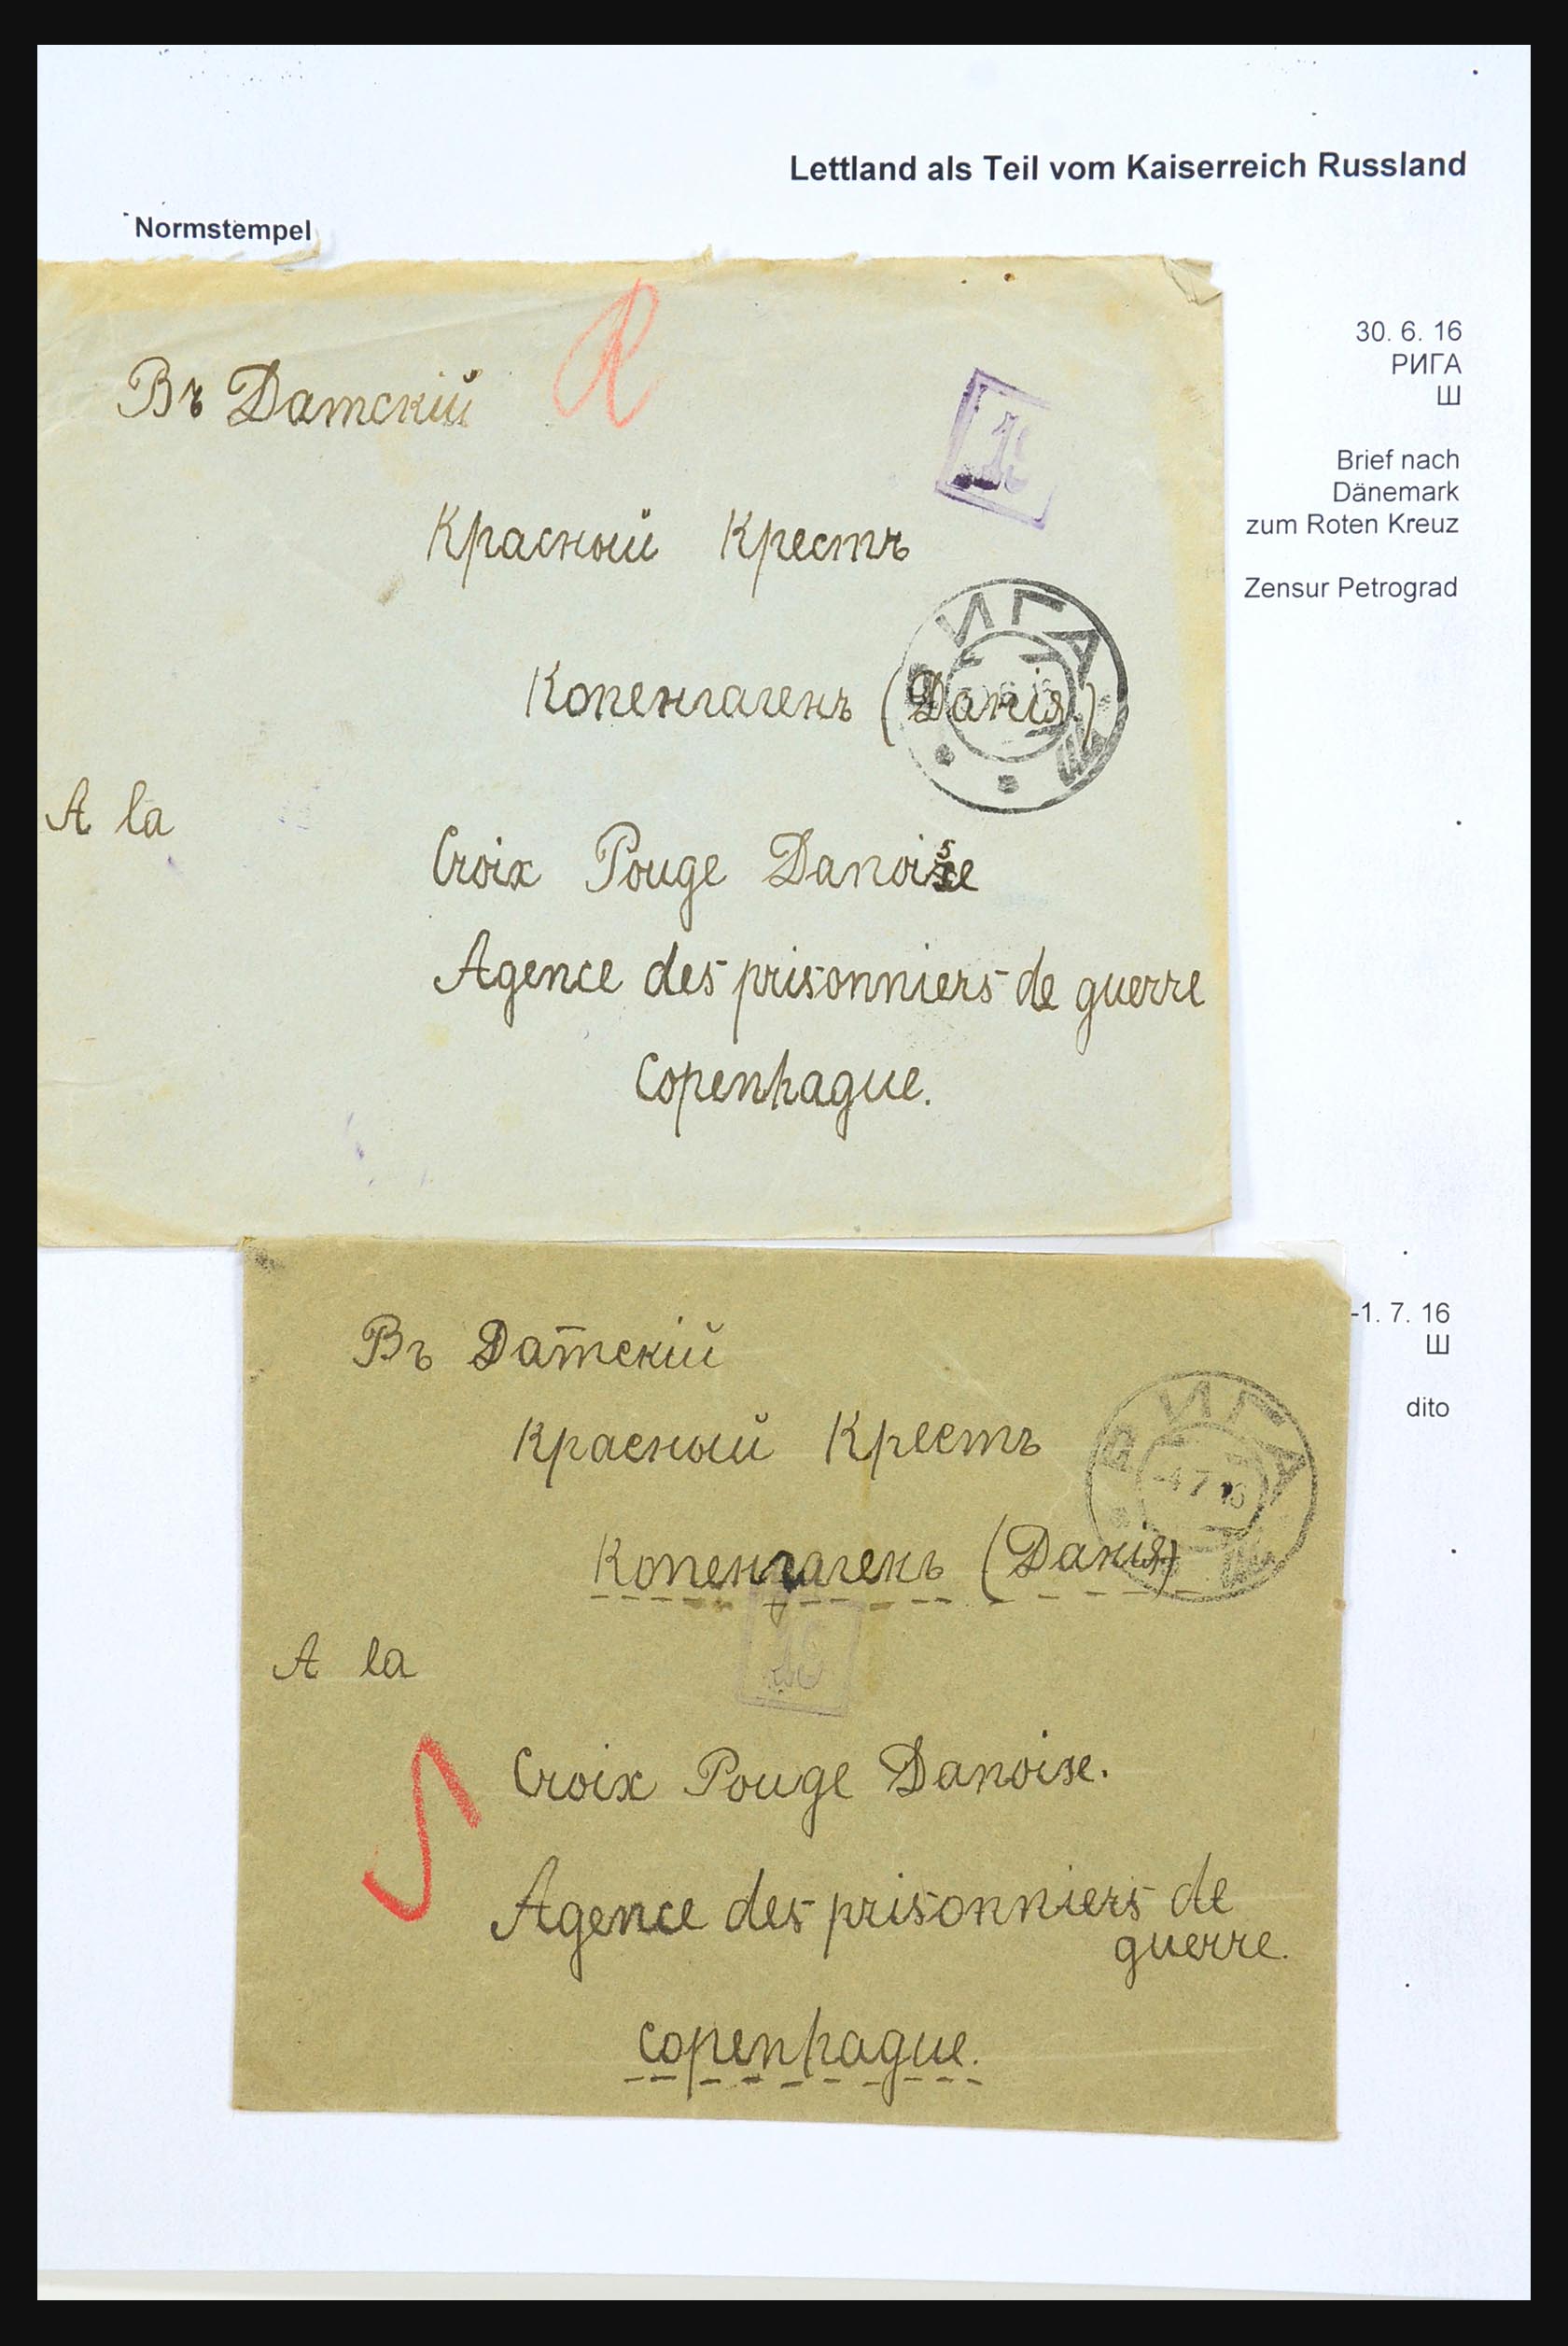 31305 128 - 31305 Latvia as part of Russia 1817-1918.